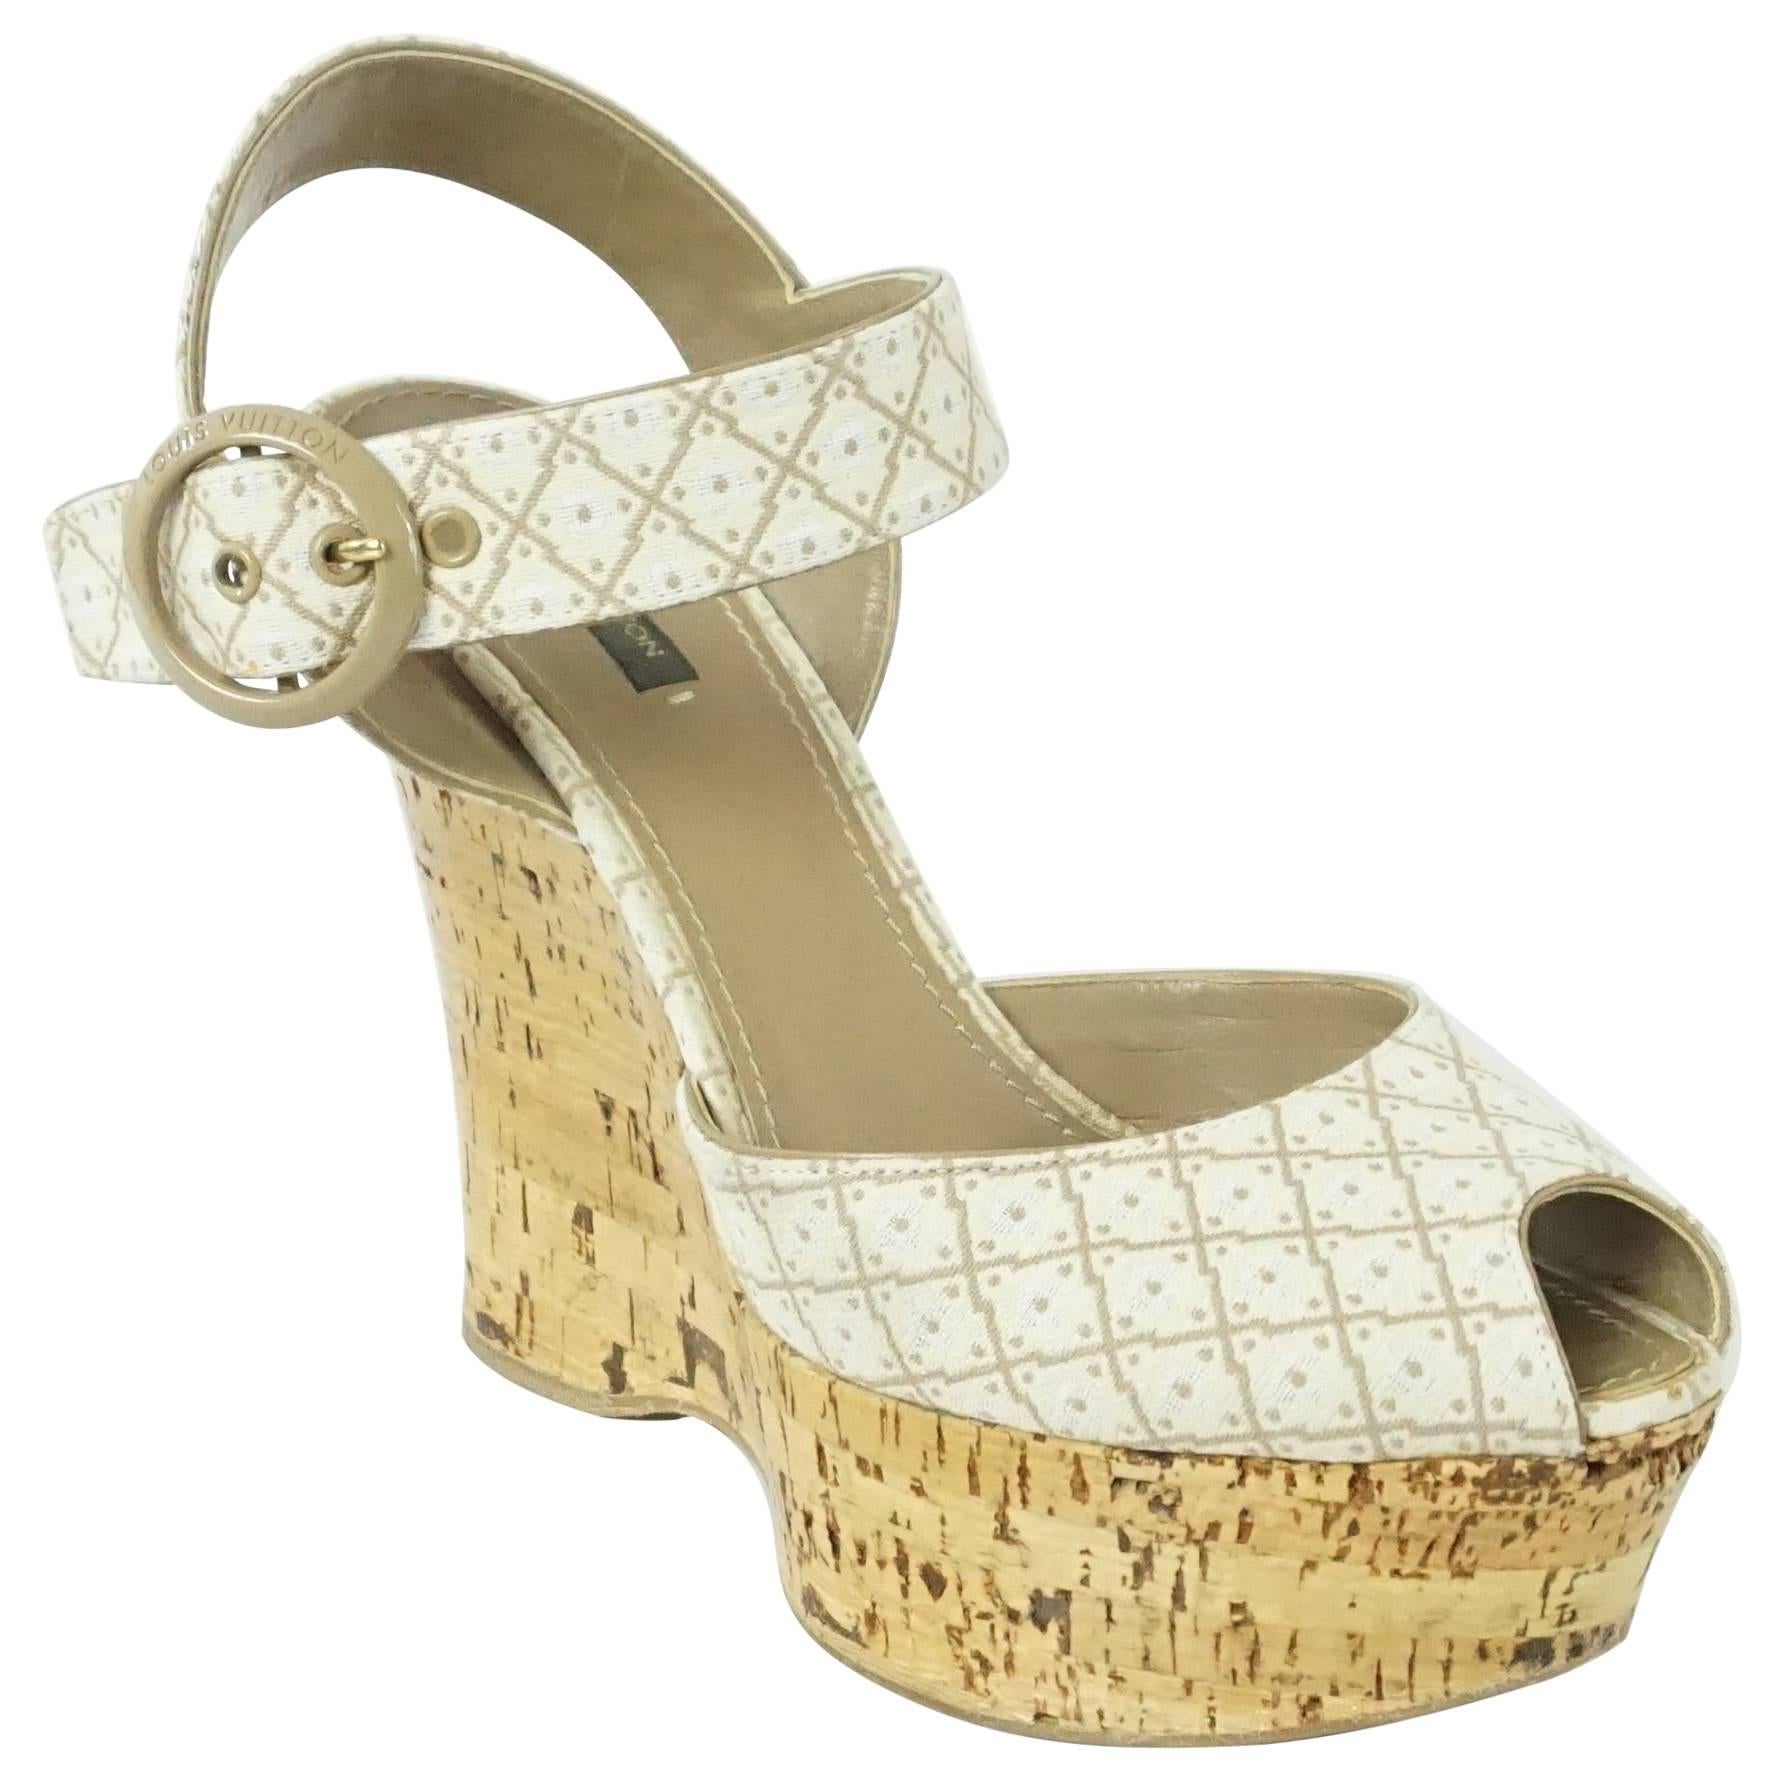 Louis Vuitton Beige Printed Cork Wedges with Ankle Strap - 41 For Sale